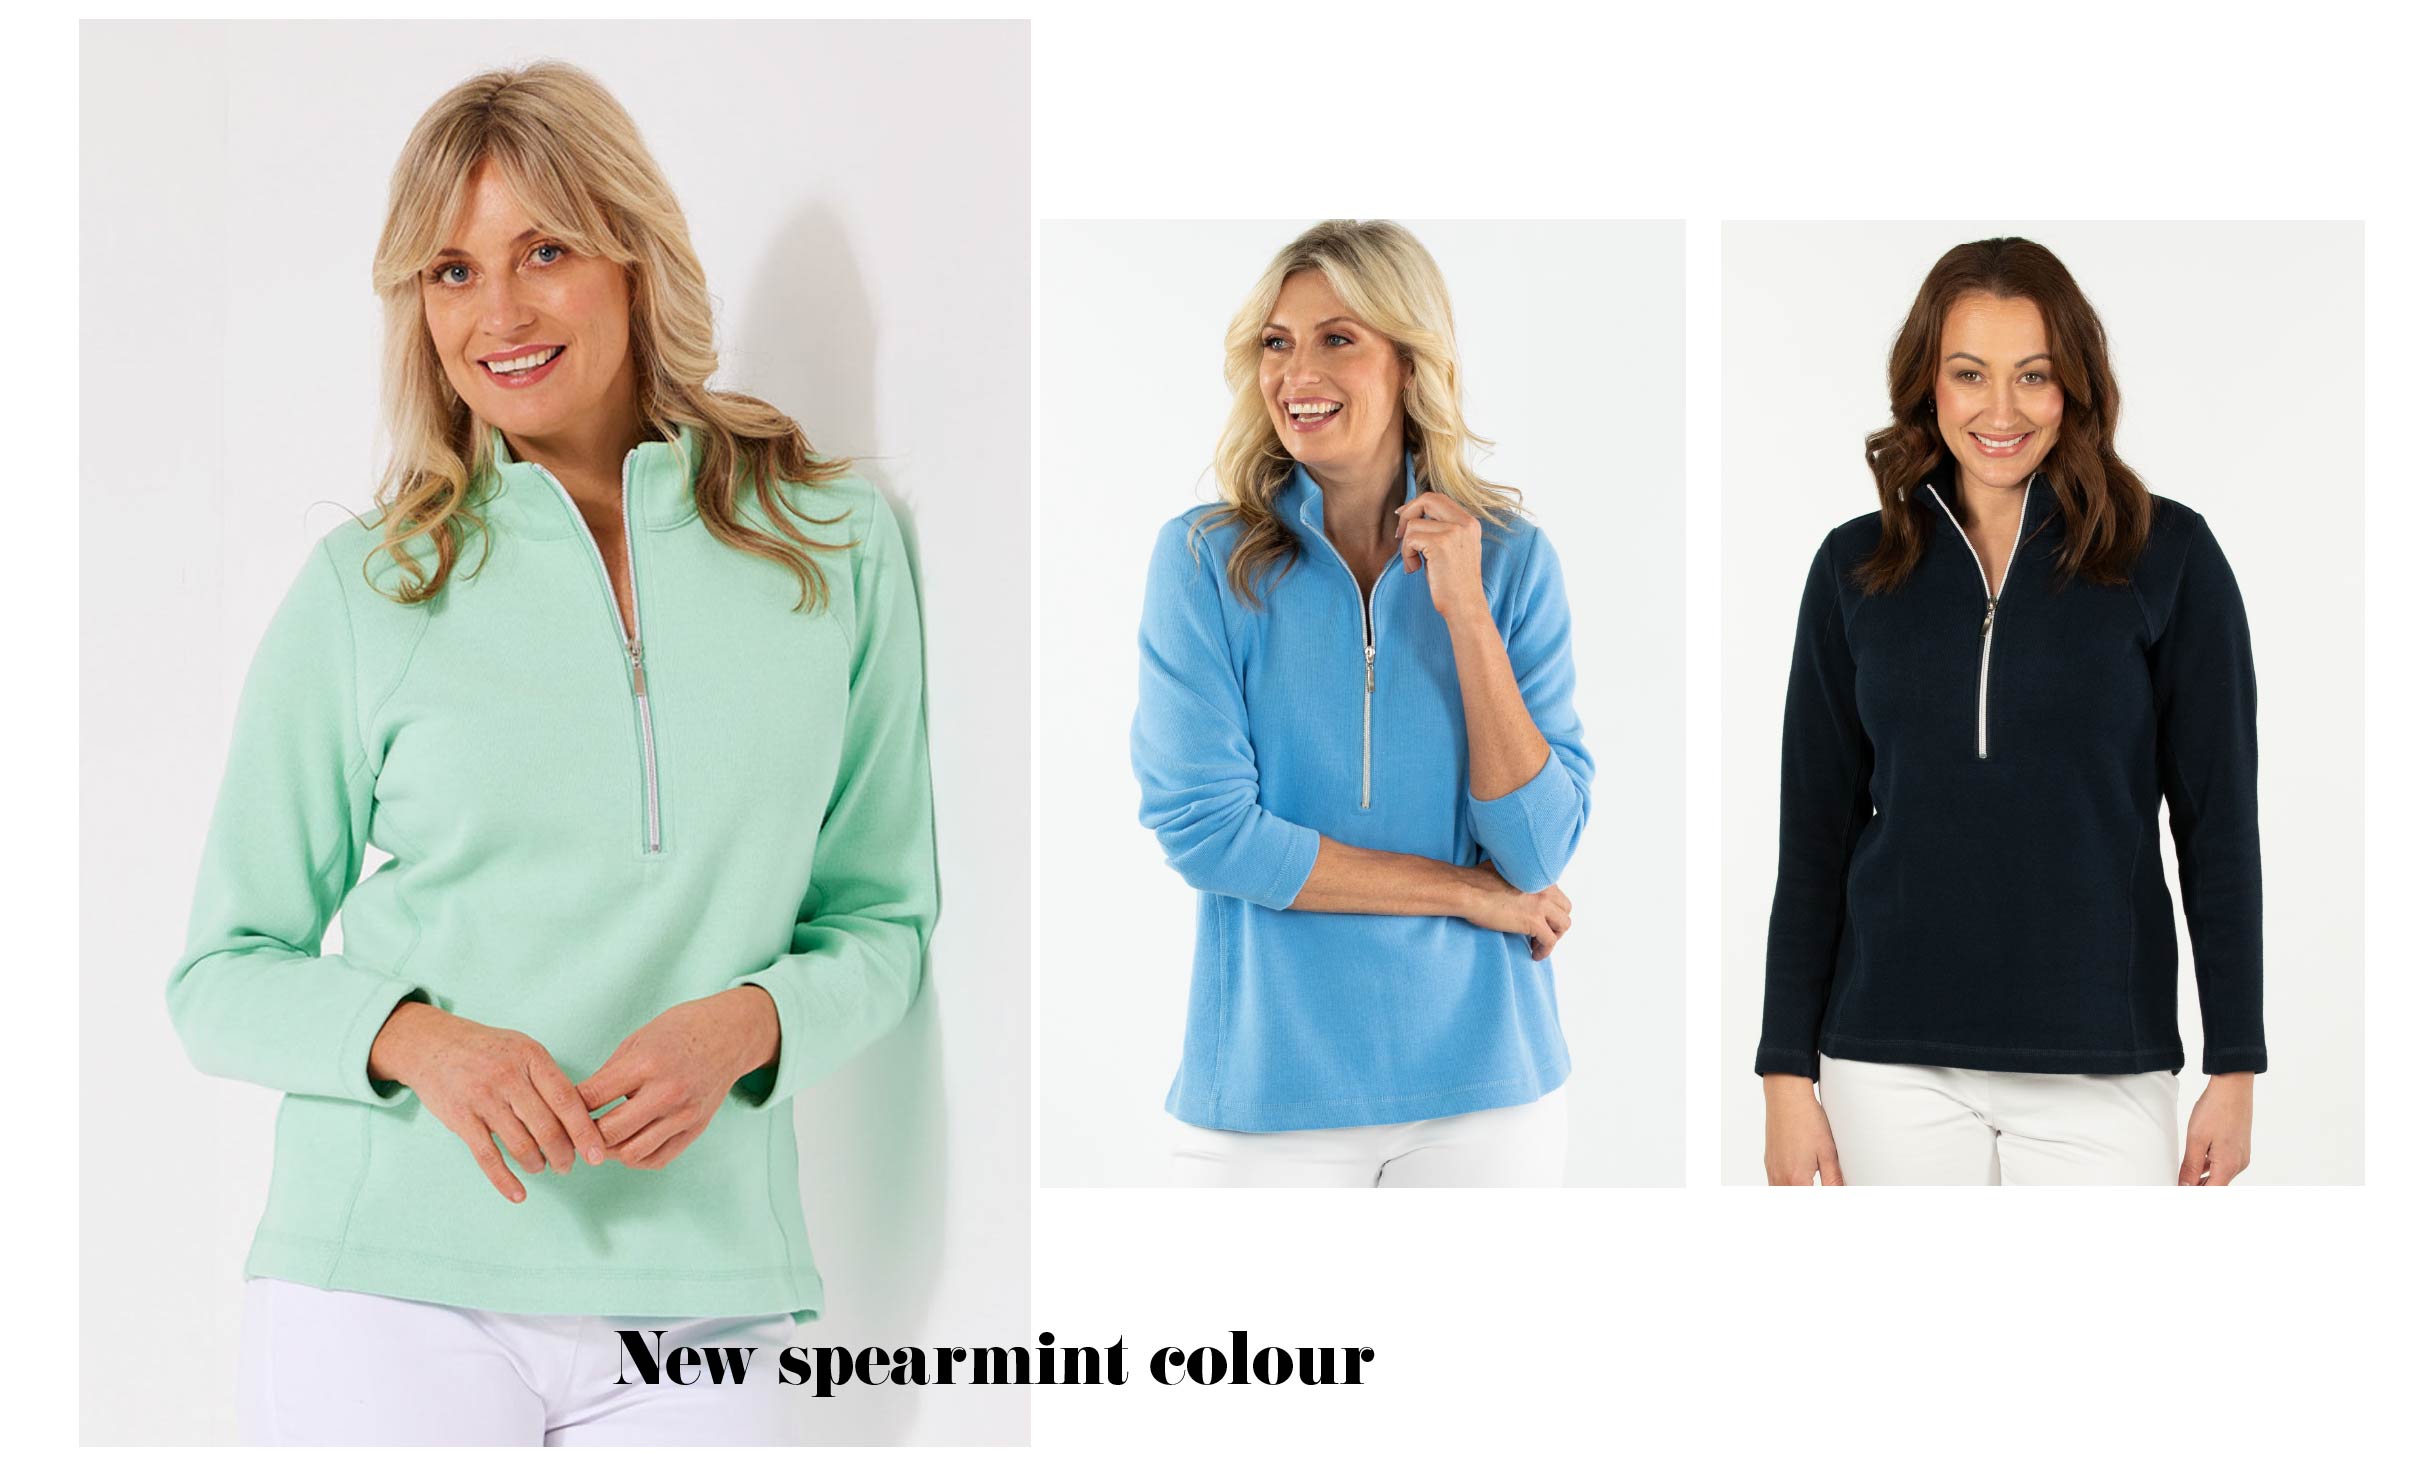 Leisurewear top with 1/4 zip in three coluors - mint green, pale blue and navy blue